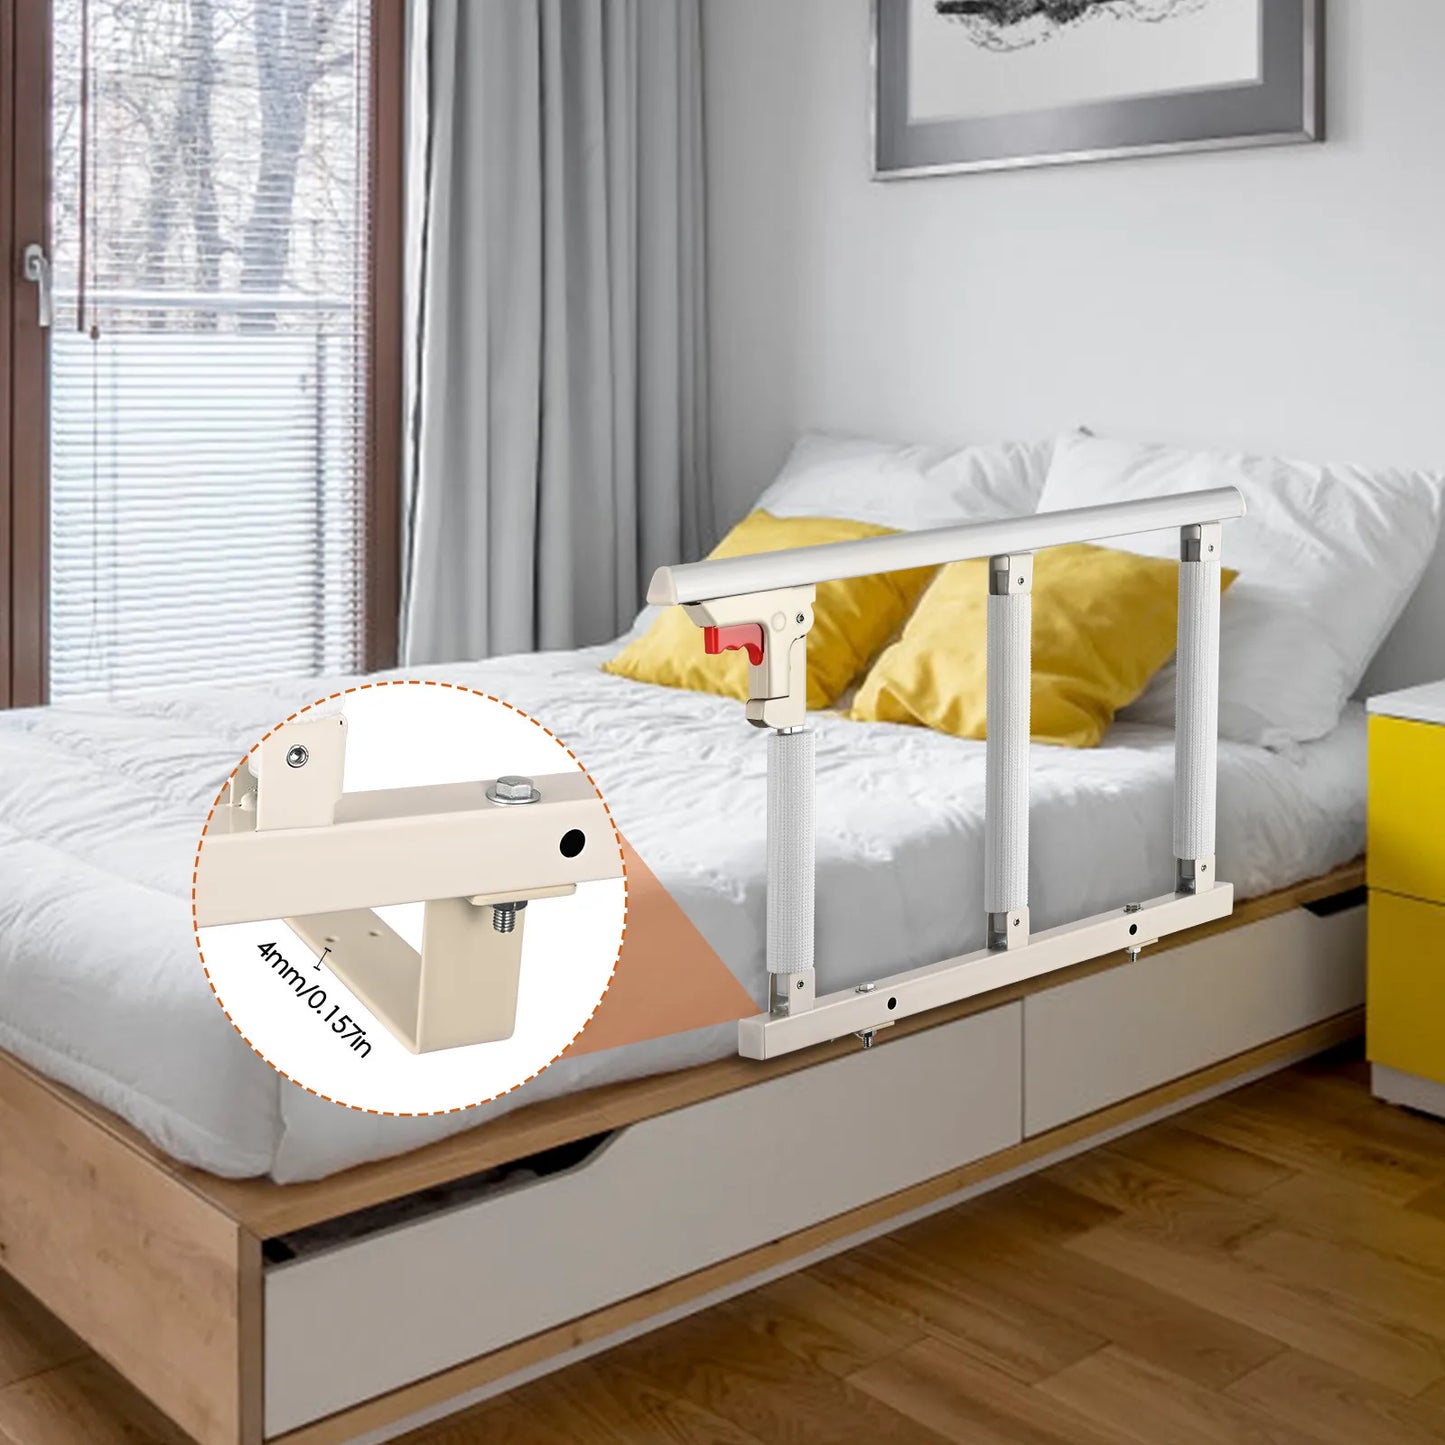 For Seniors Bed Side Guard Rail To Prevent Falling Out Bed - Easier Life Emporium